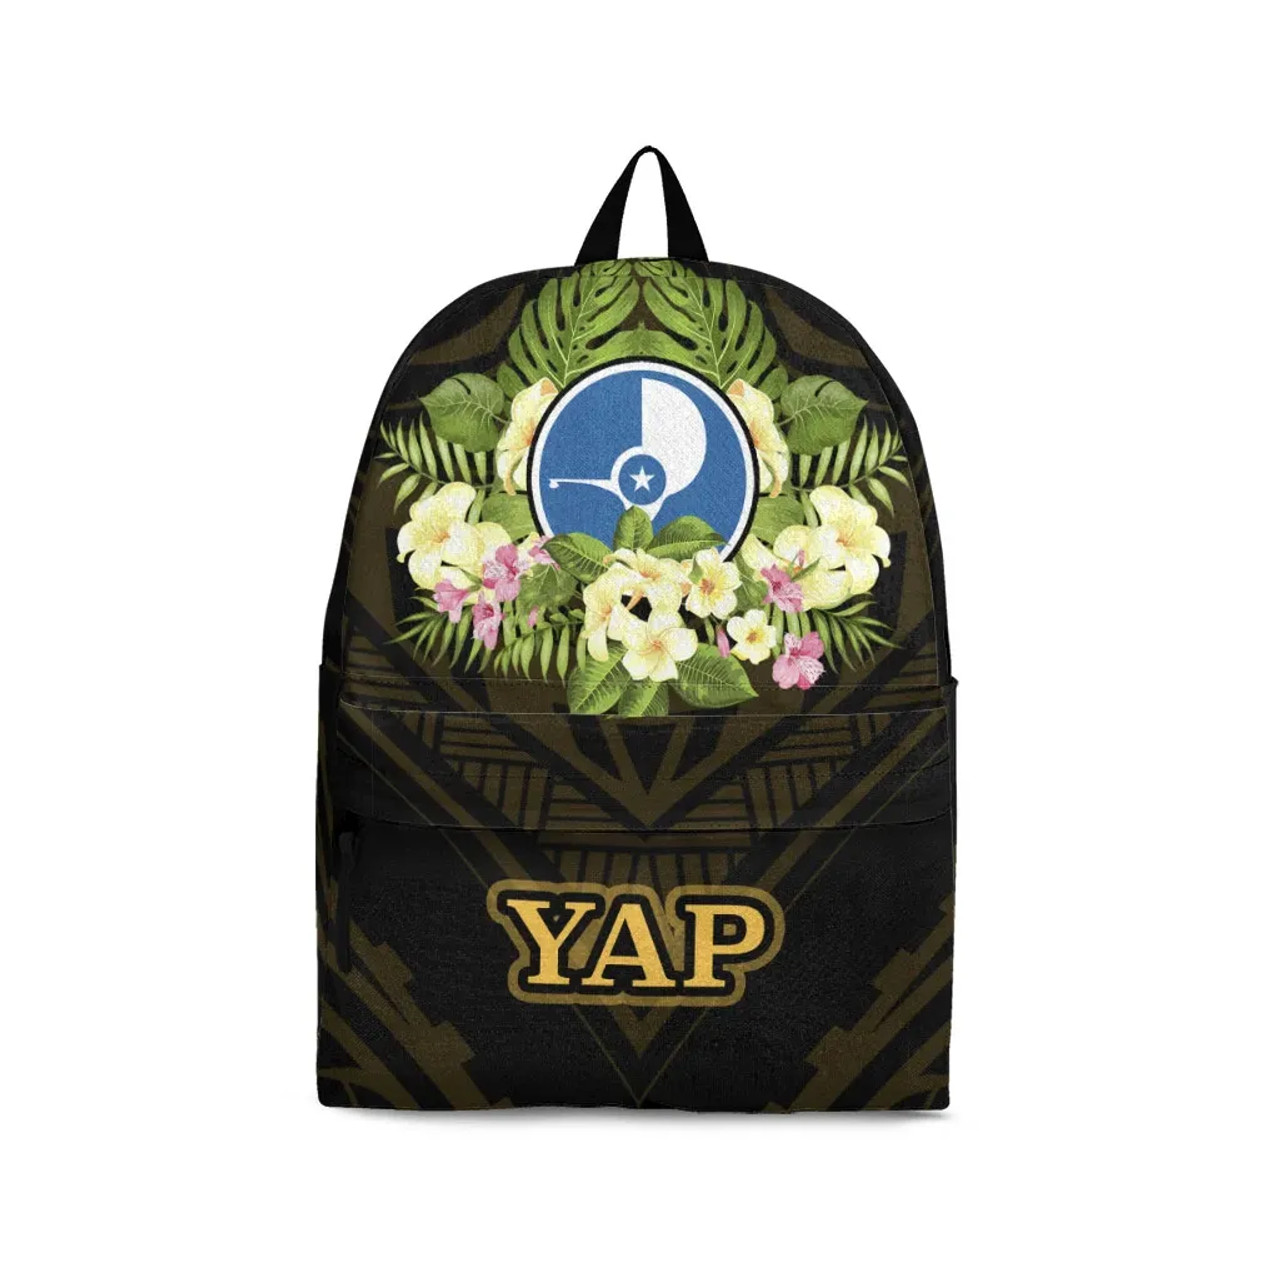 Yap State Backpack - Polynesian Gold Patterns Collection 1